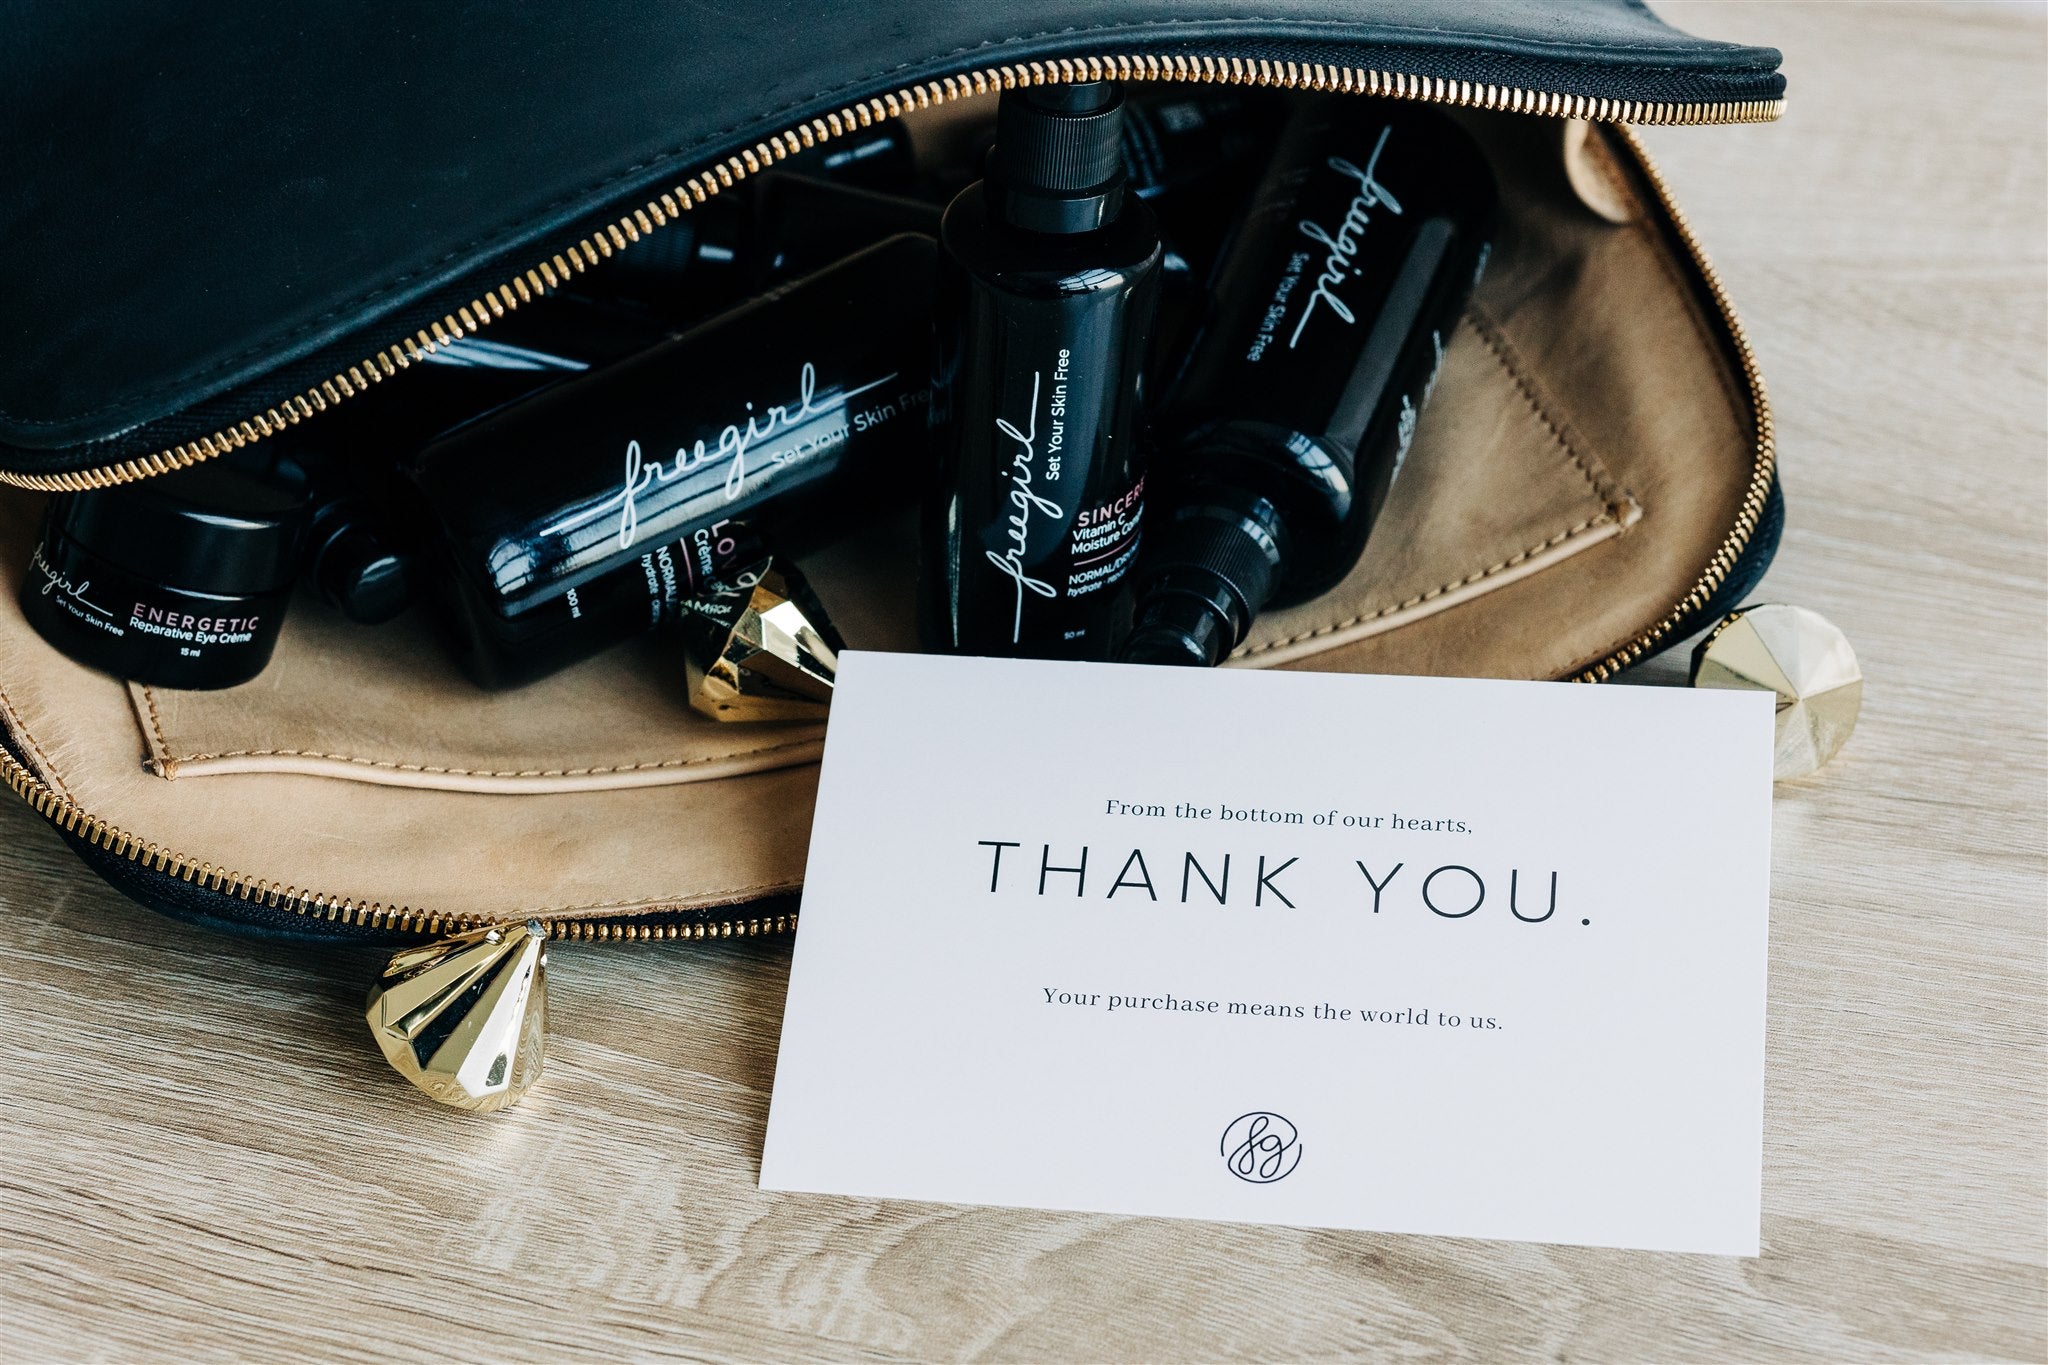 Thank you card with freegirl skincare